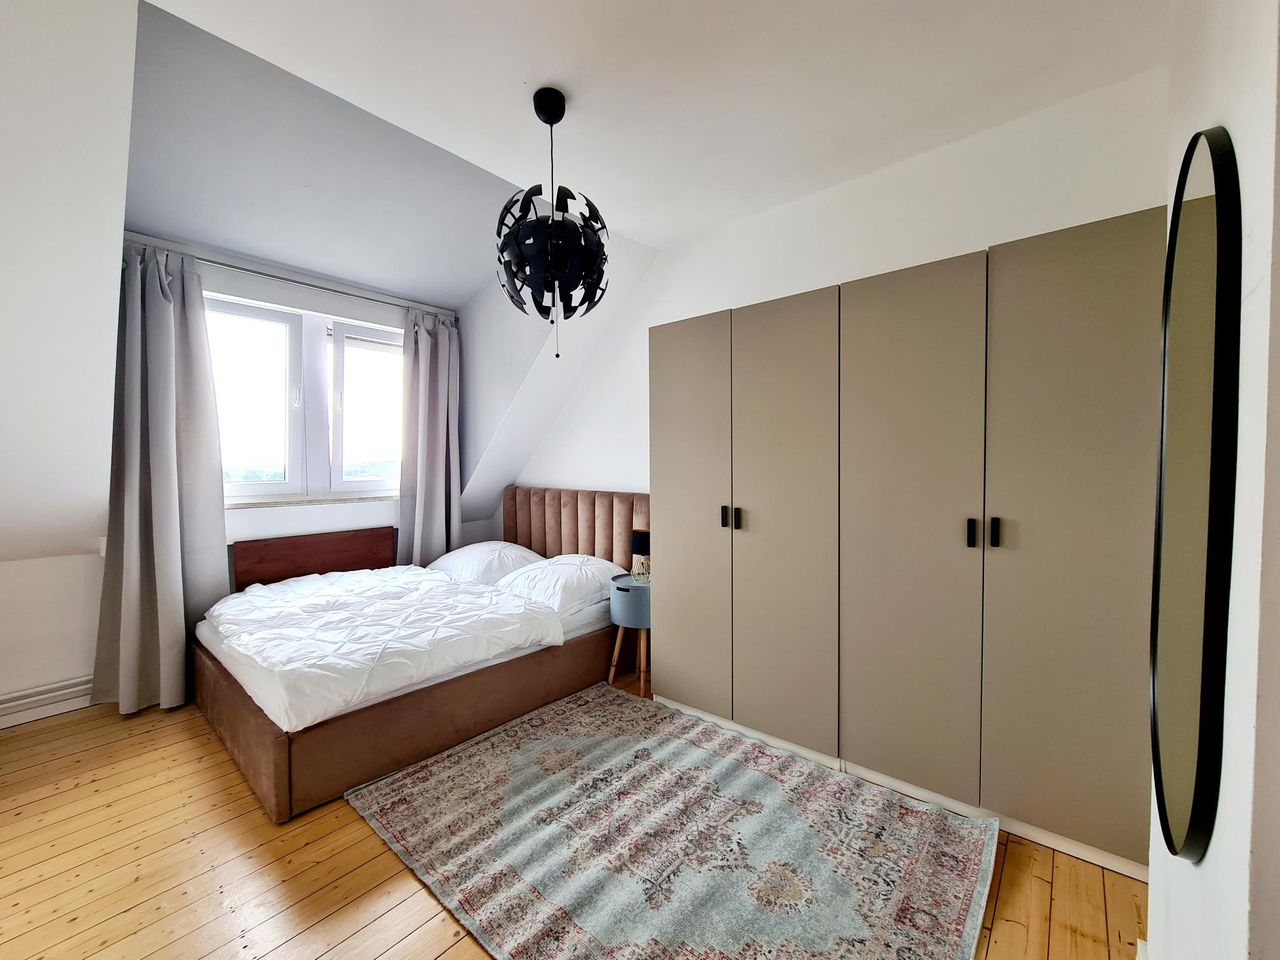 Newly renovated and fully furnished APT in Wiesbaden